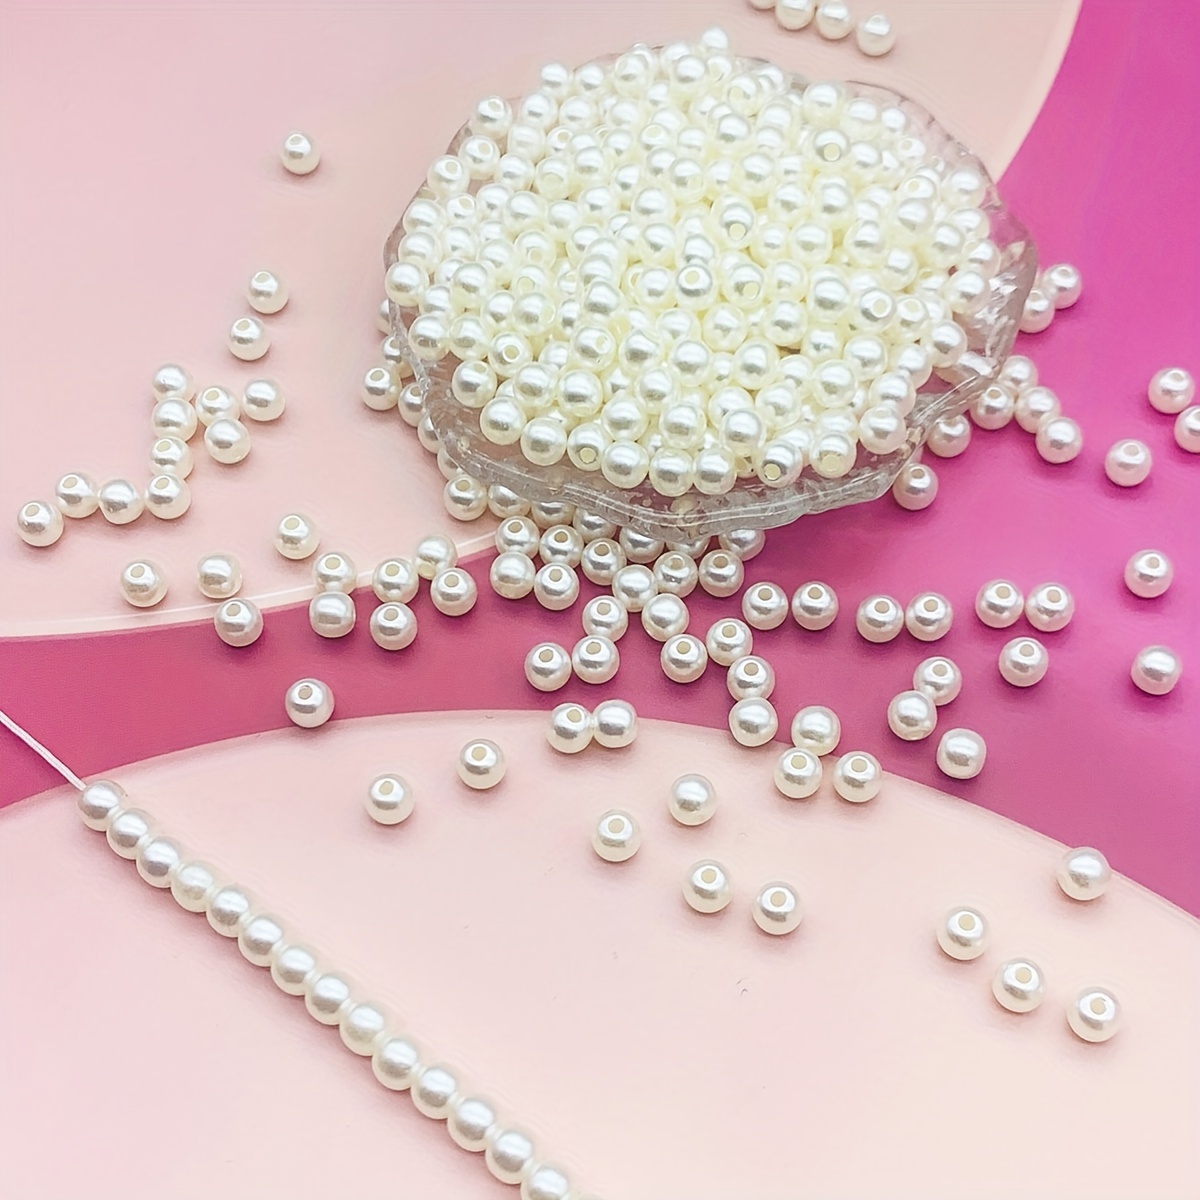 1500pcs Undrilled Art Faux Pearls 8mm Pink No Holes Imitated Pearl Beads  Makeup Beads For Vase Fillers, Wedding, Party, Home Decoration